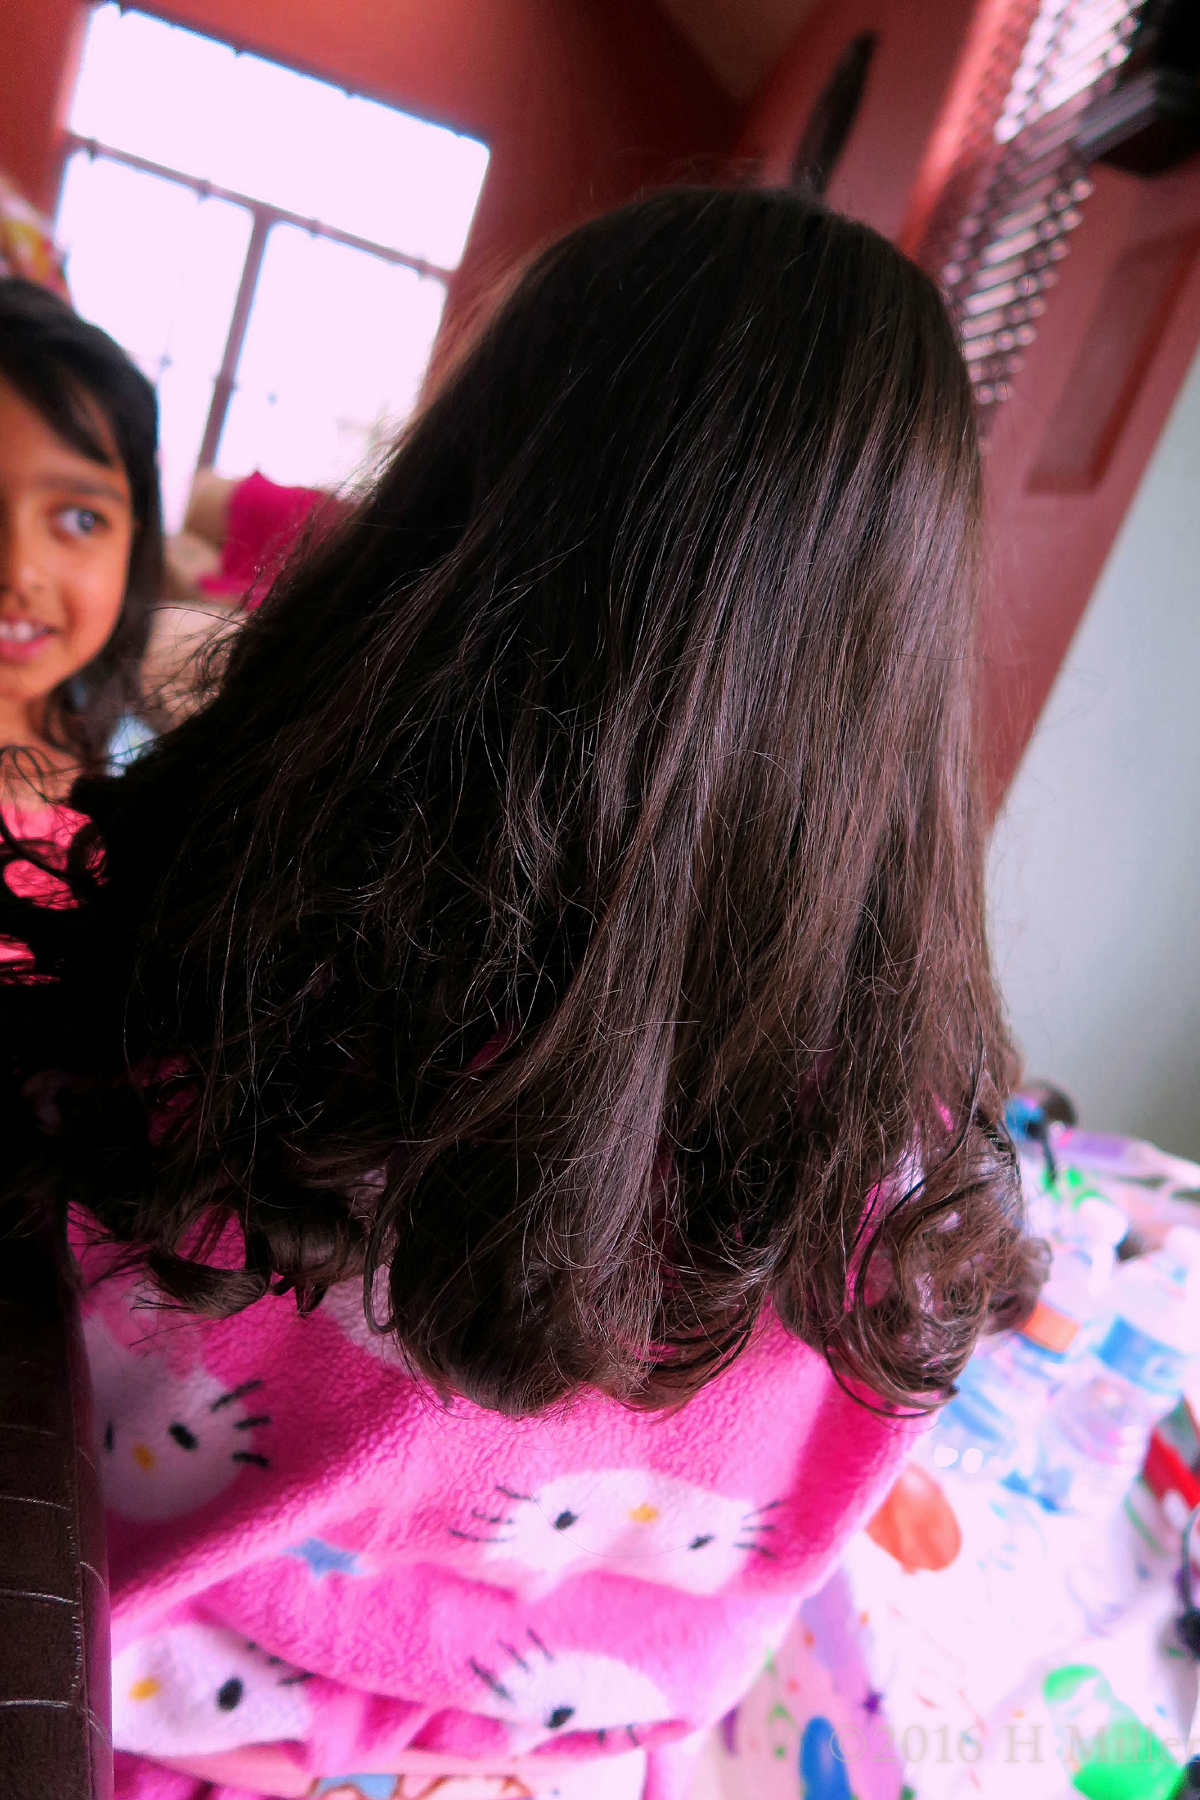 Aashi Chose To Have Her Hair Curled At Her Home Spa Party. 